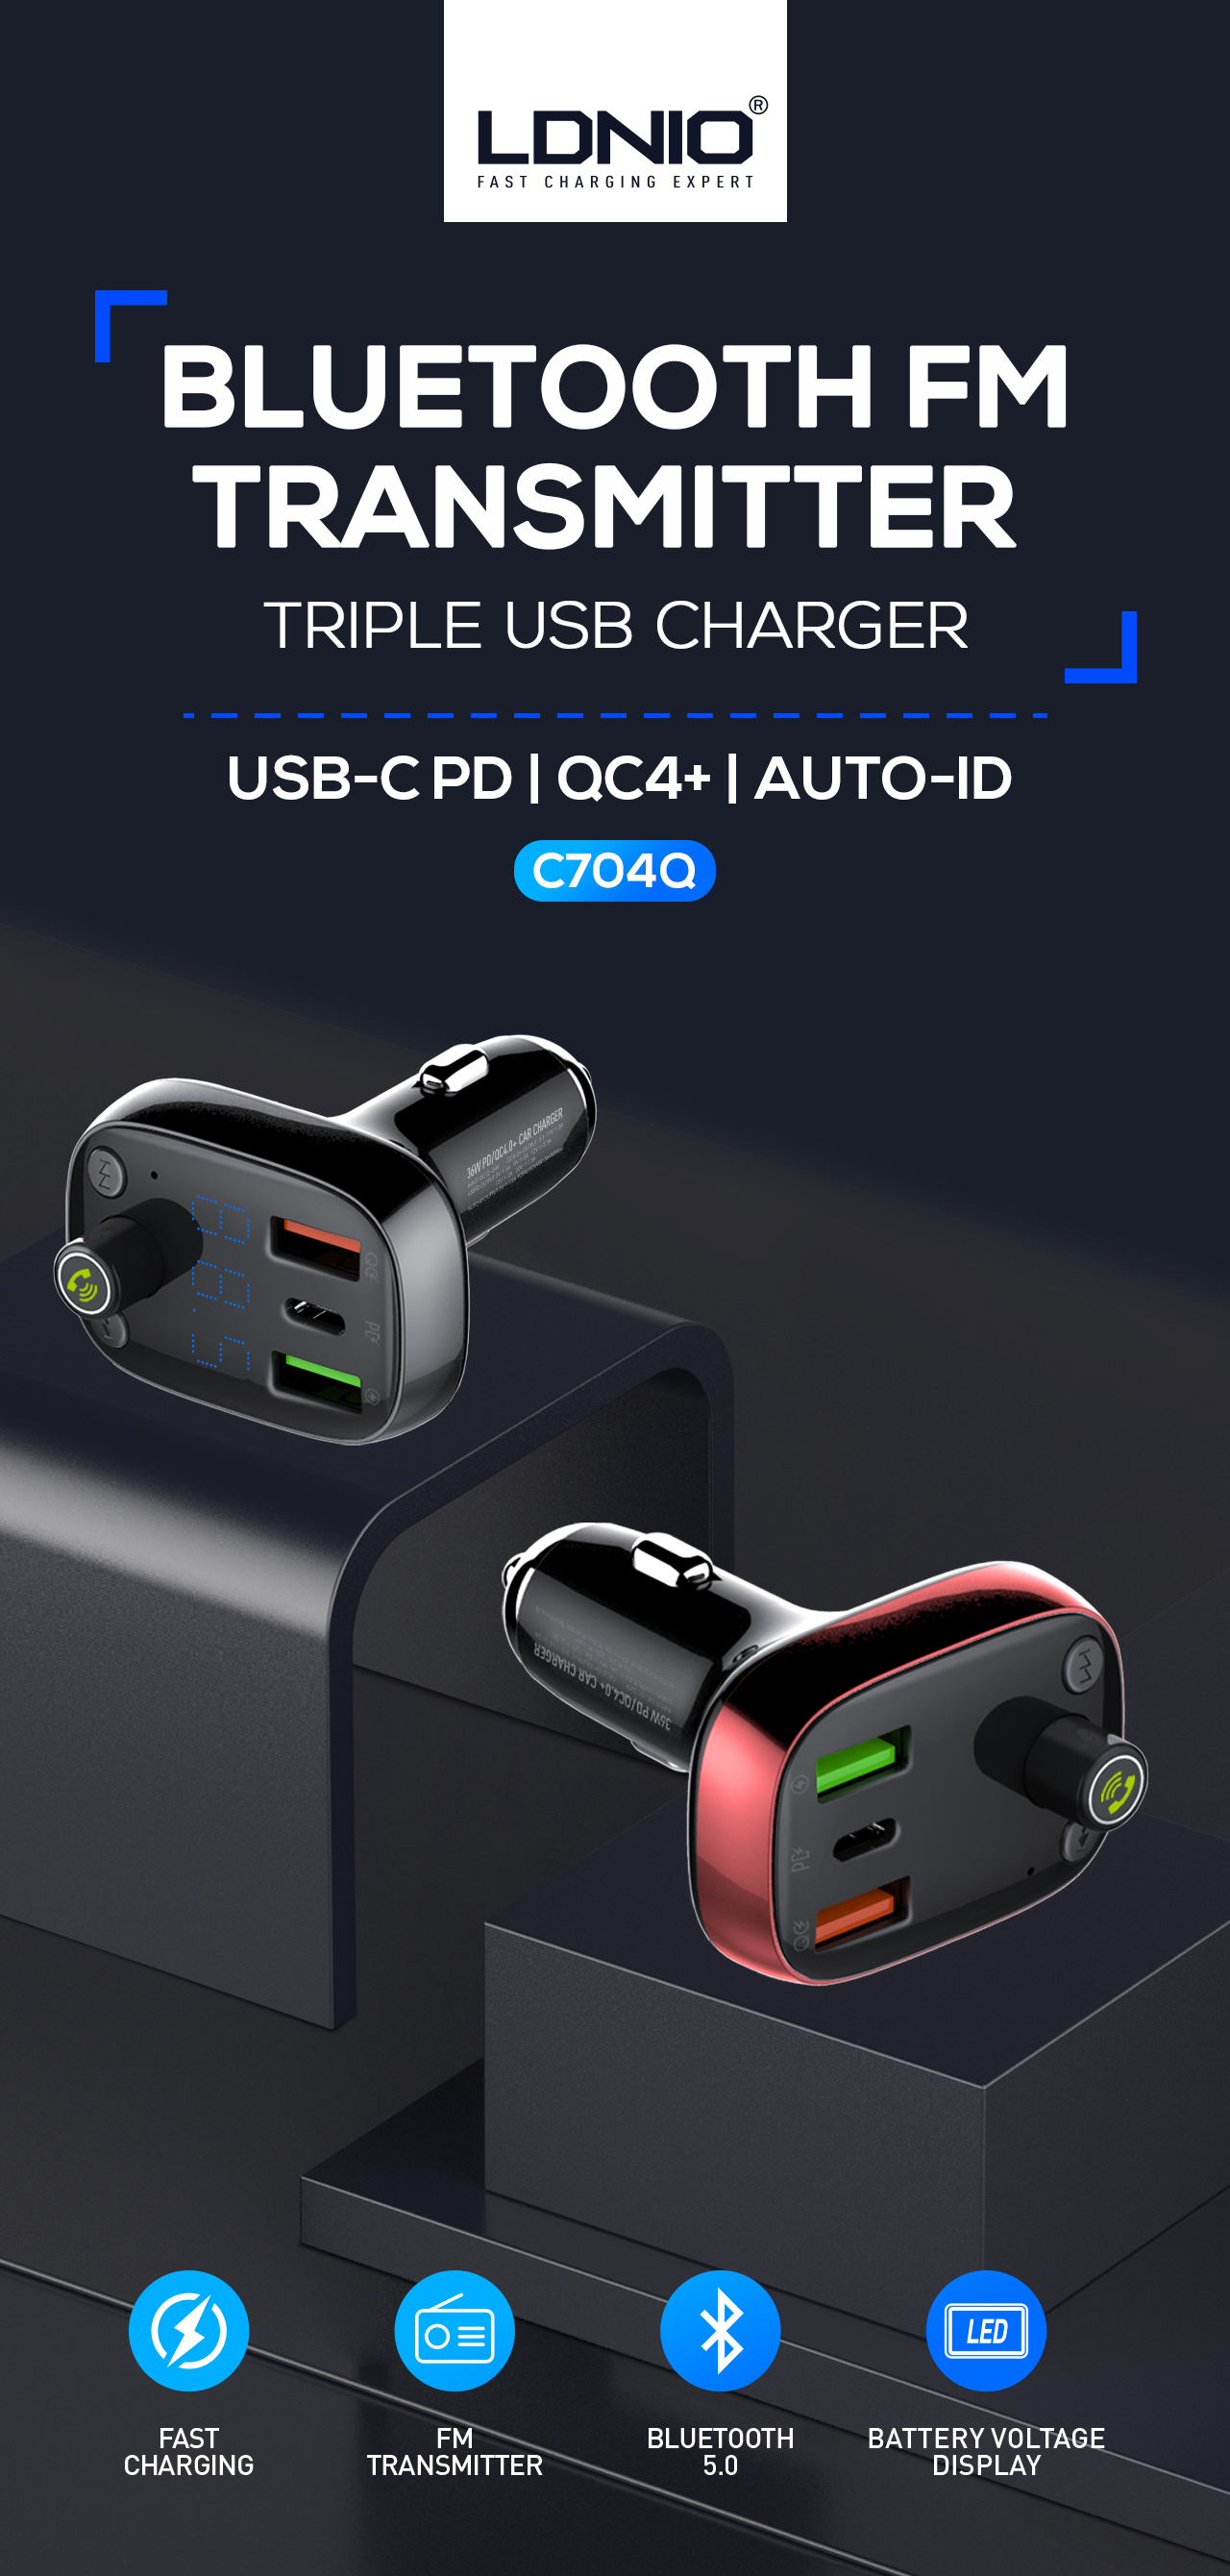 LDNIO-C704Q-USB-Car-Charger-bluetooth-FM-Transmitter-MP3-Player-USB-C-PD-QC4-Fast-Charging-For-iPhon-1741740-1